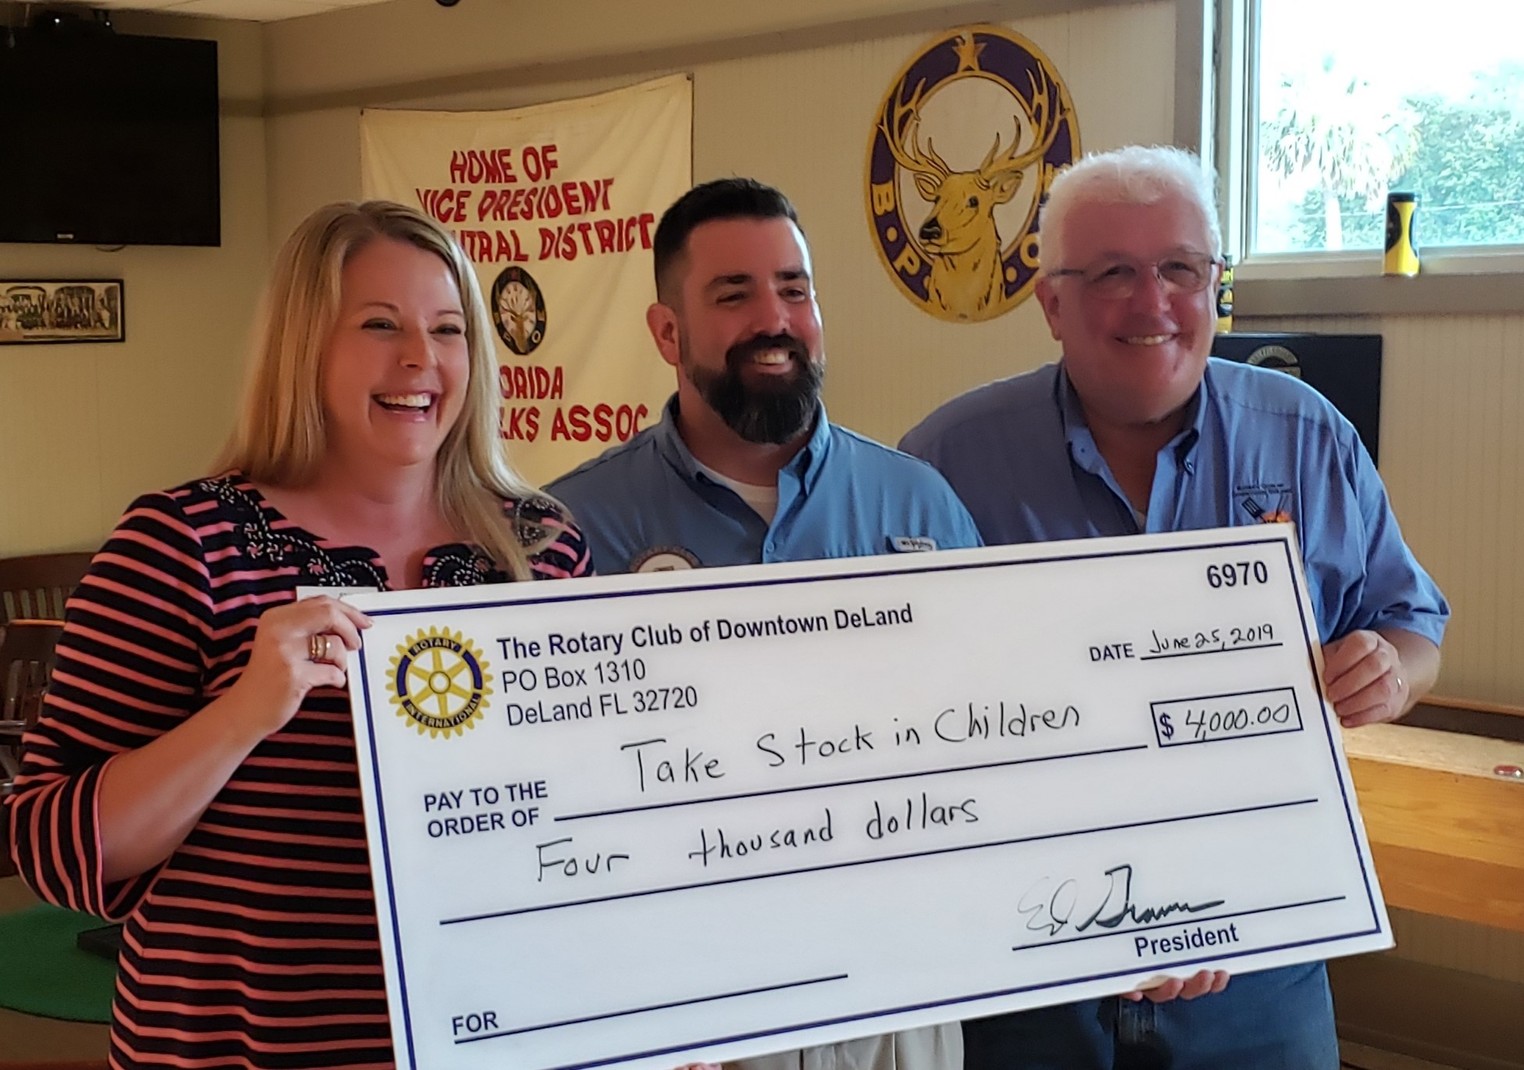 FUTURES FOUNDATION'S TSIC PROGRAM RECEIVES $4,000 FROM ROTARY CLUB OF  DOWNTOWN DELAND